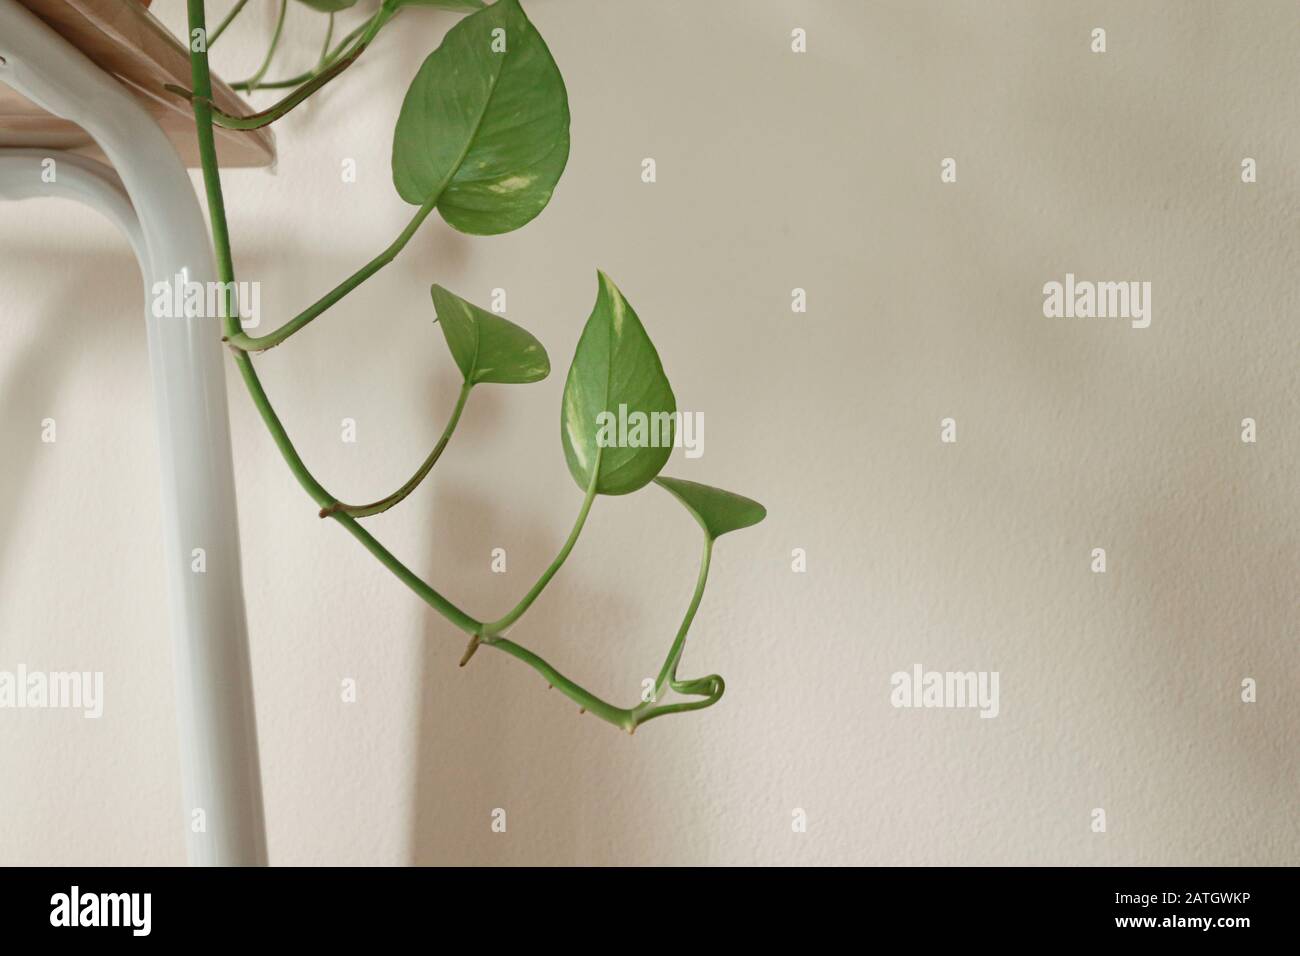 Minimalist home decoration for the Spring season using houseplants to create a relaxing and gender neutral space Stock Photo